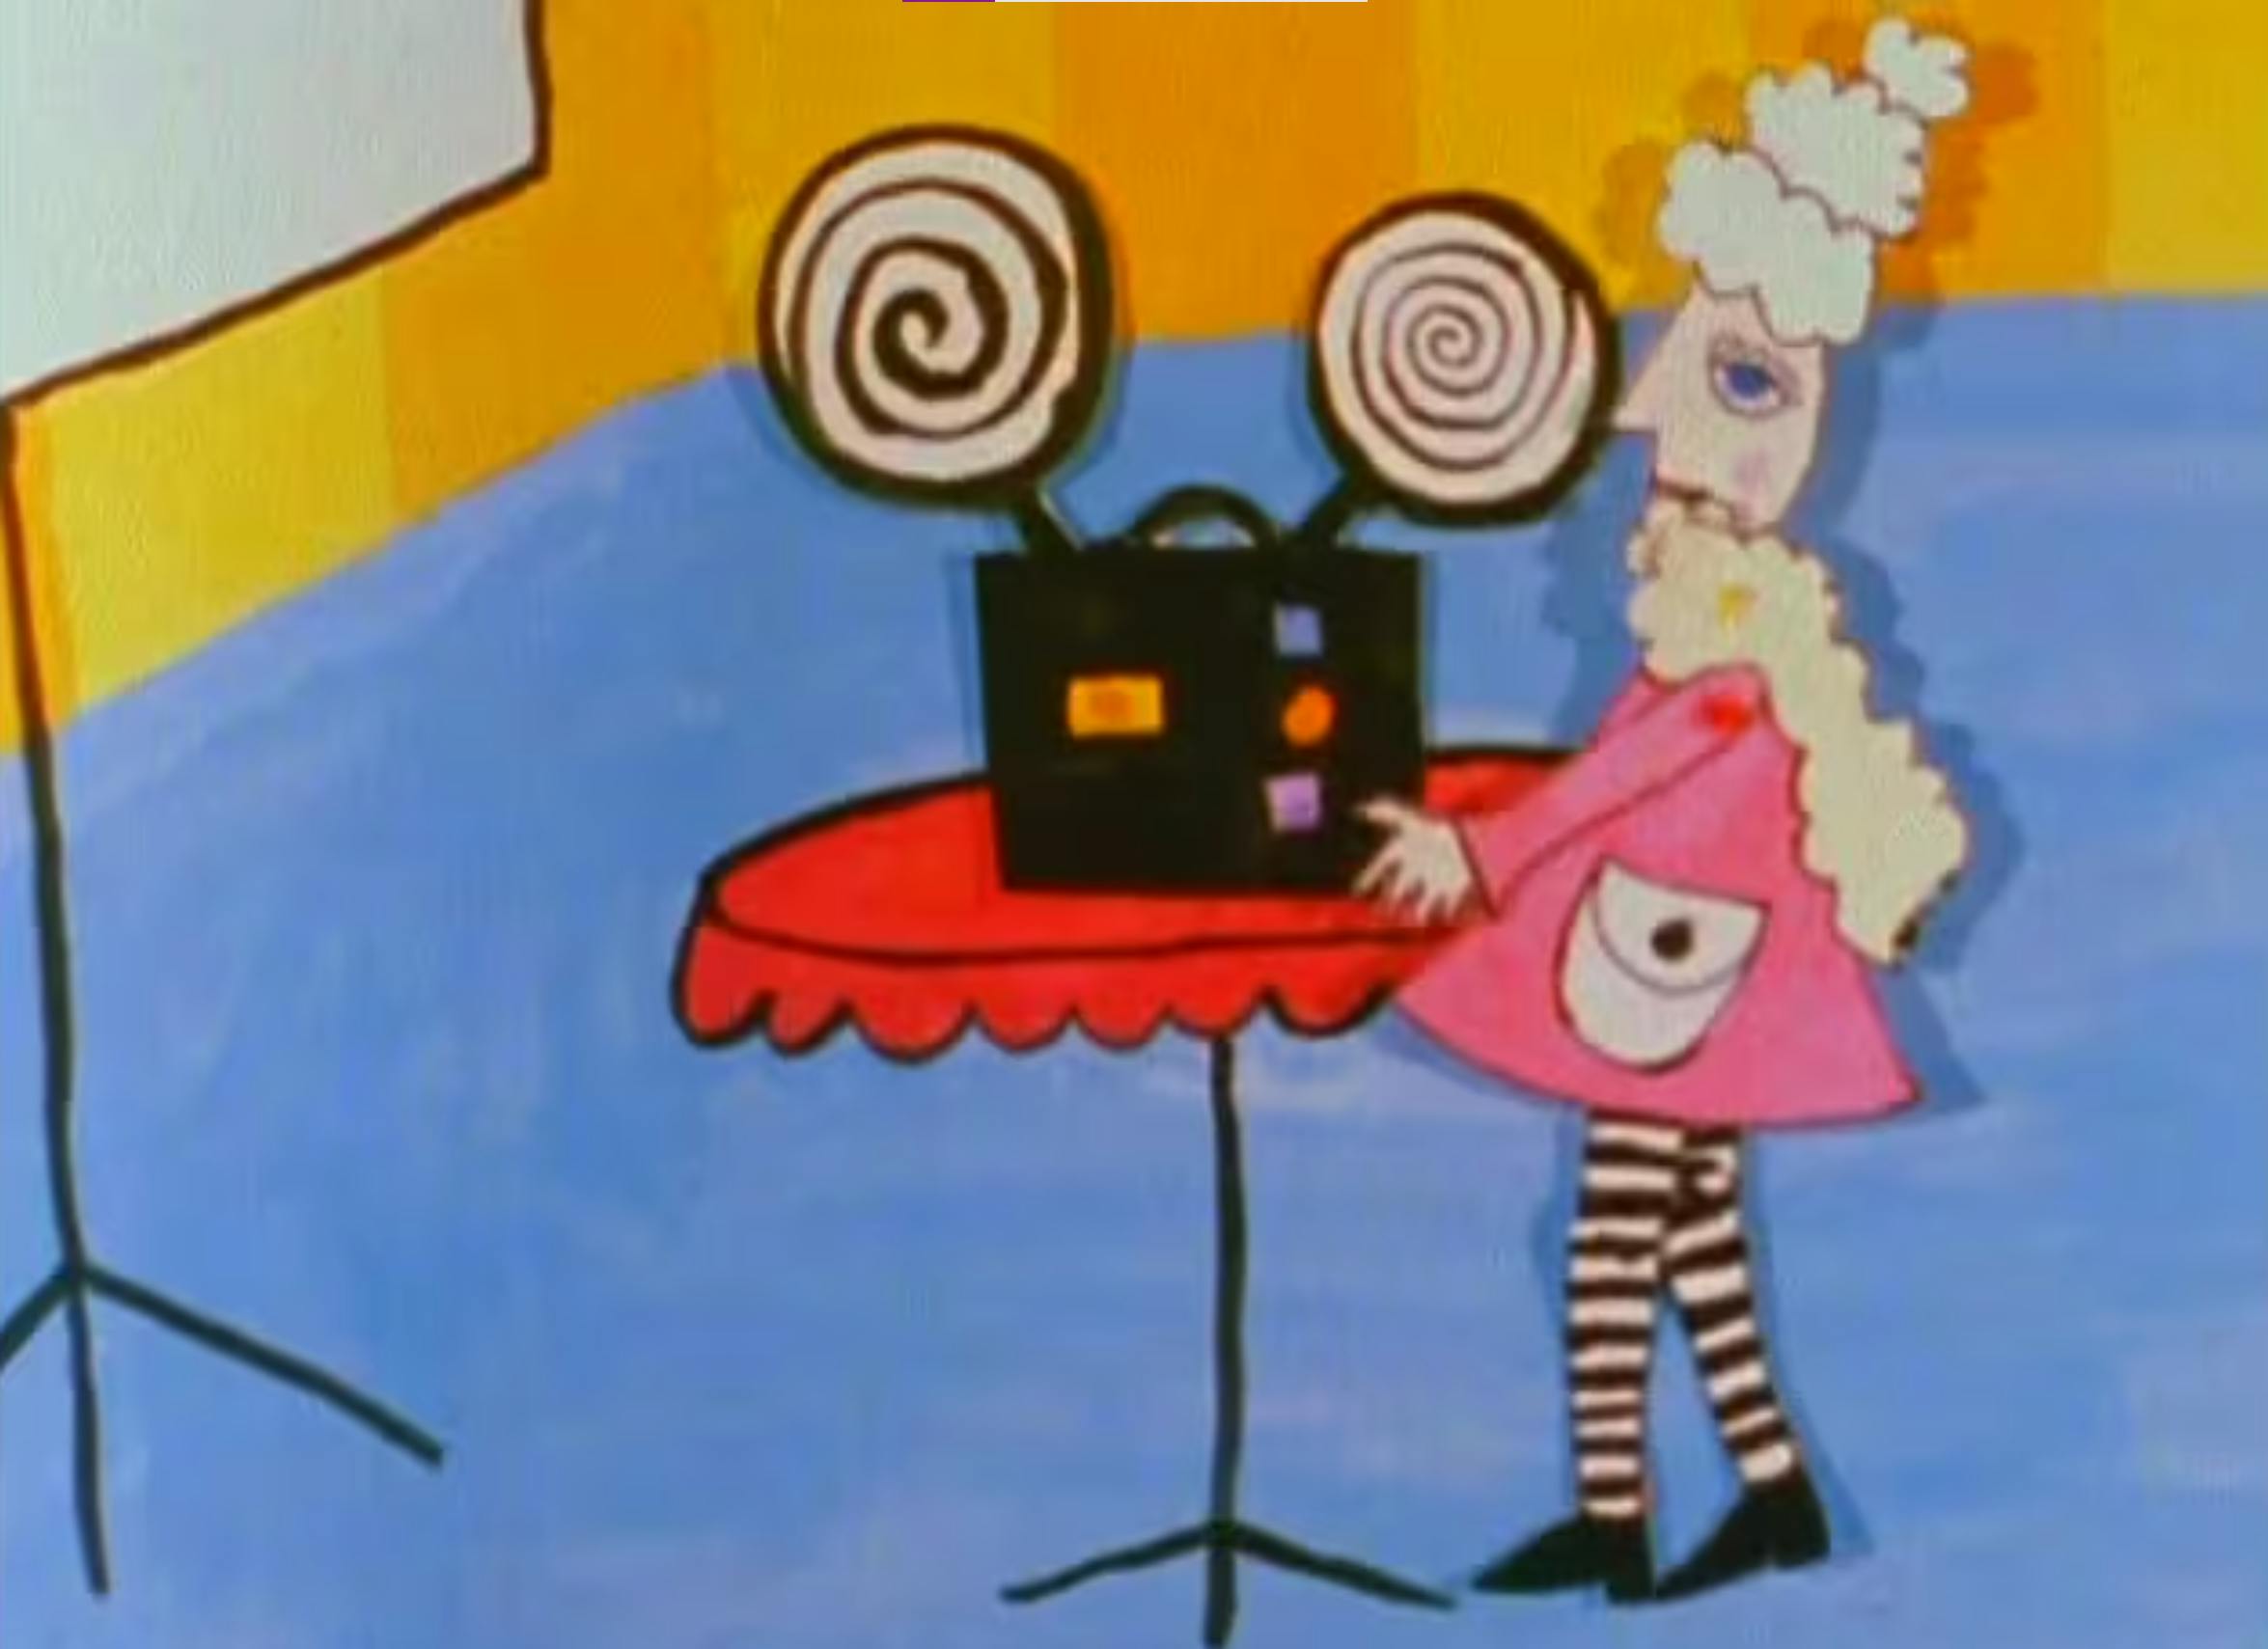 cut out animation puppet of Madame Winger, an older woman with tall poofy white hair, wearing a cream-coloured boa, a pink jacket with a light grey pocket, black and white striped tights and black shoes, standing at a red table and operating a film projector. She is in a room with blue floor, orange and yellow striped walls, and a projector screen to her left. 